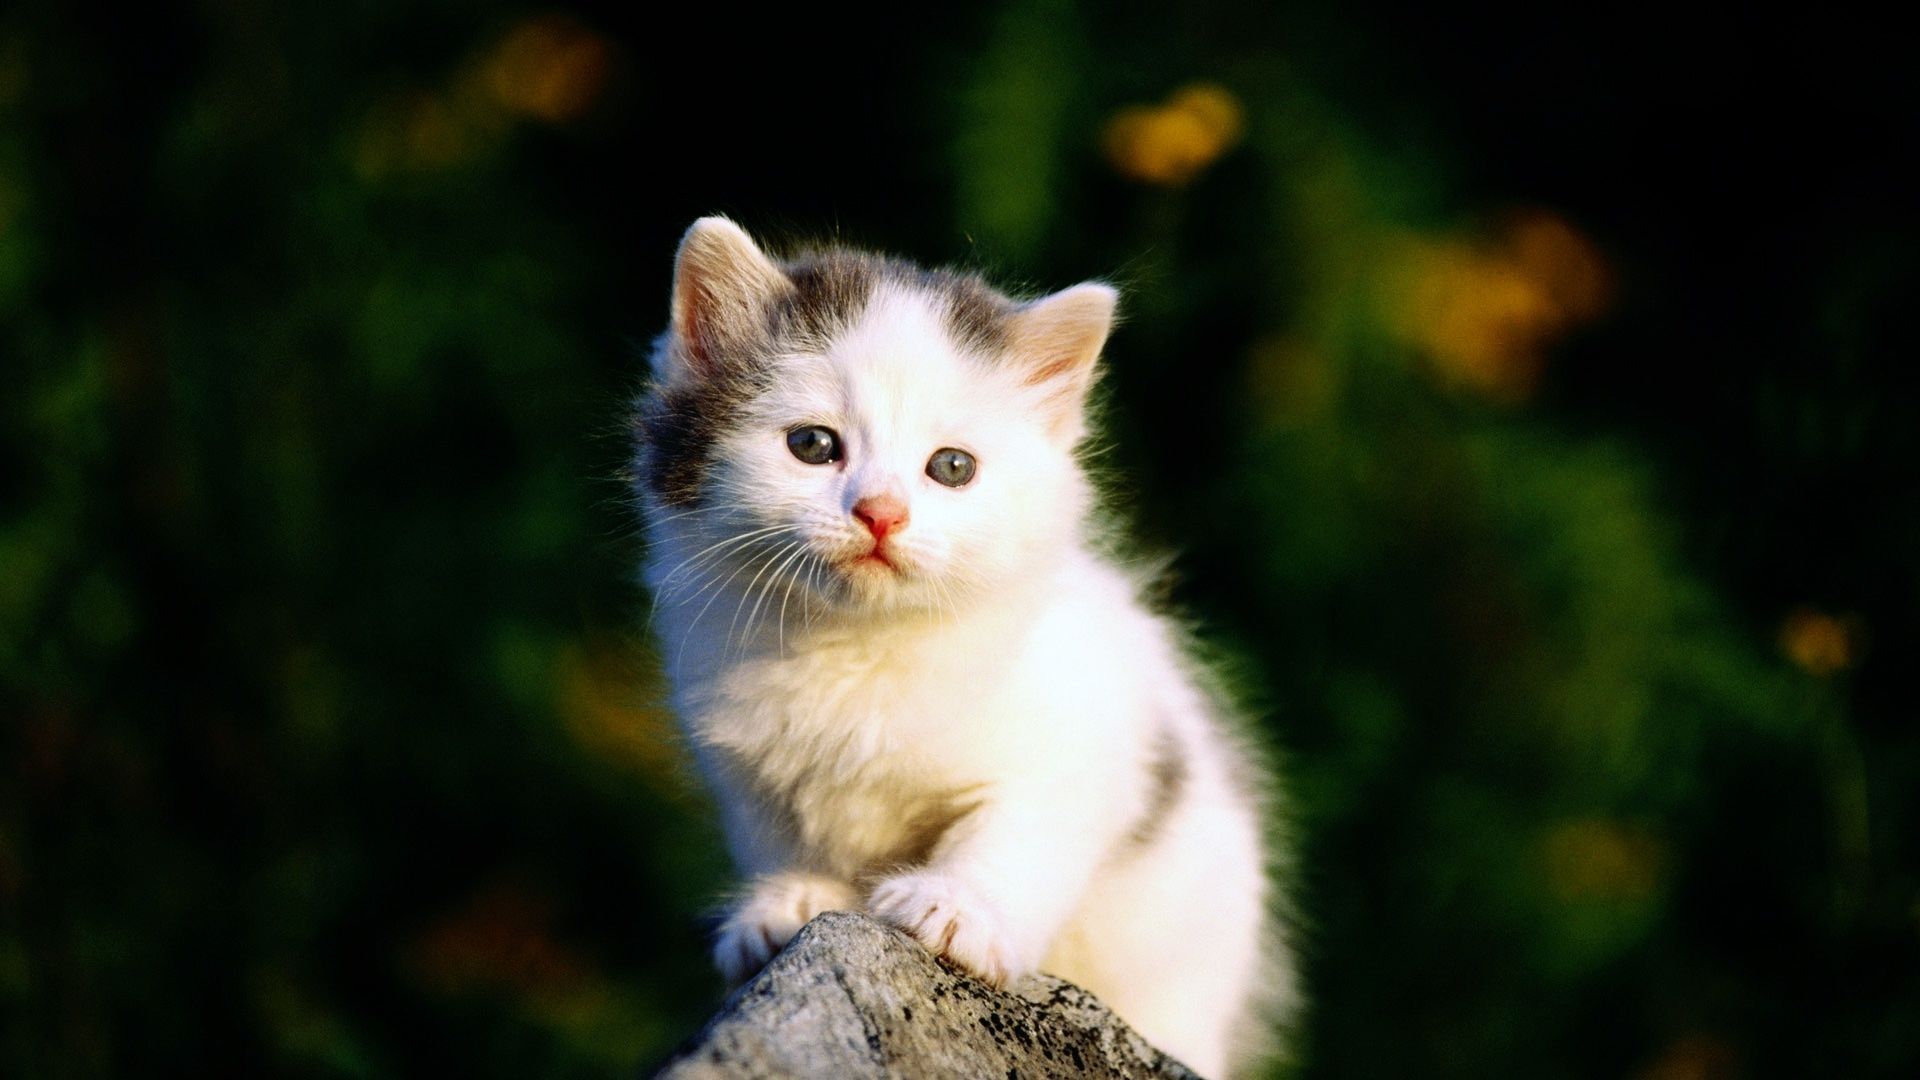 Sweet Cat HD Wallpapers – Daily Backgrounds in HD